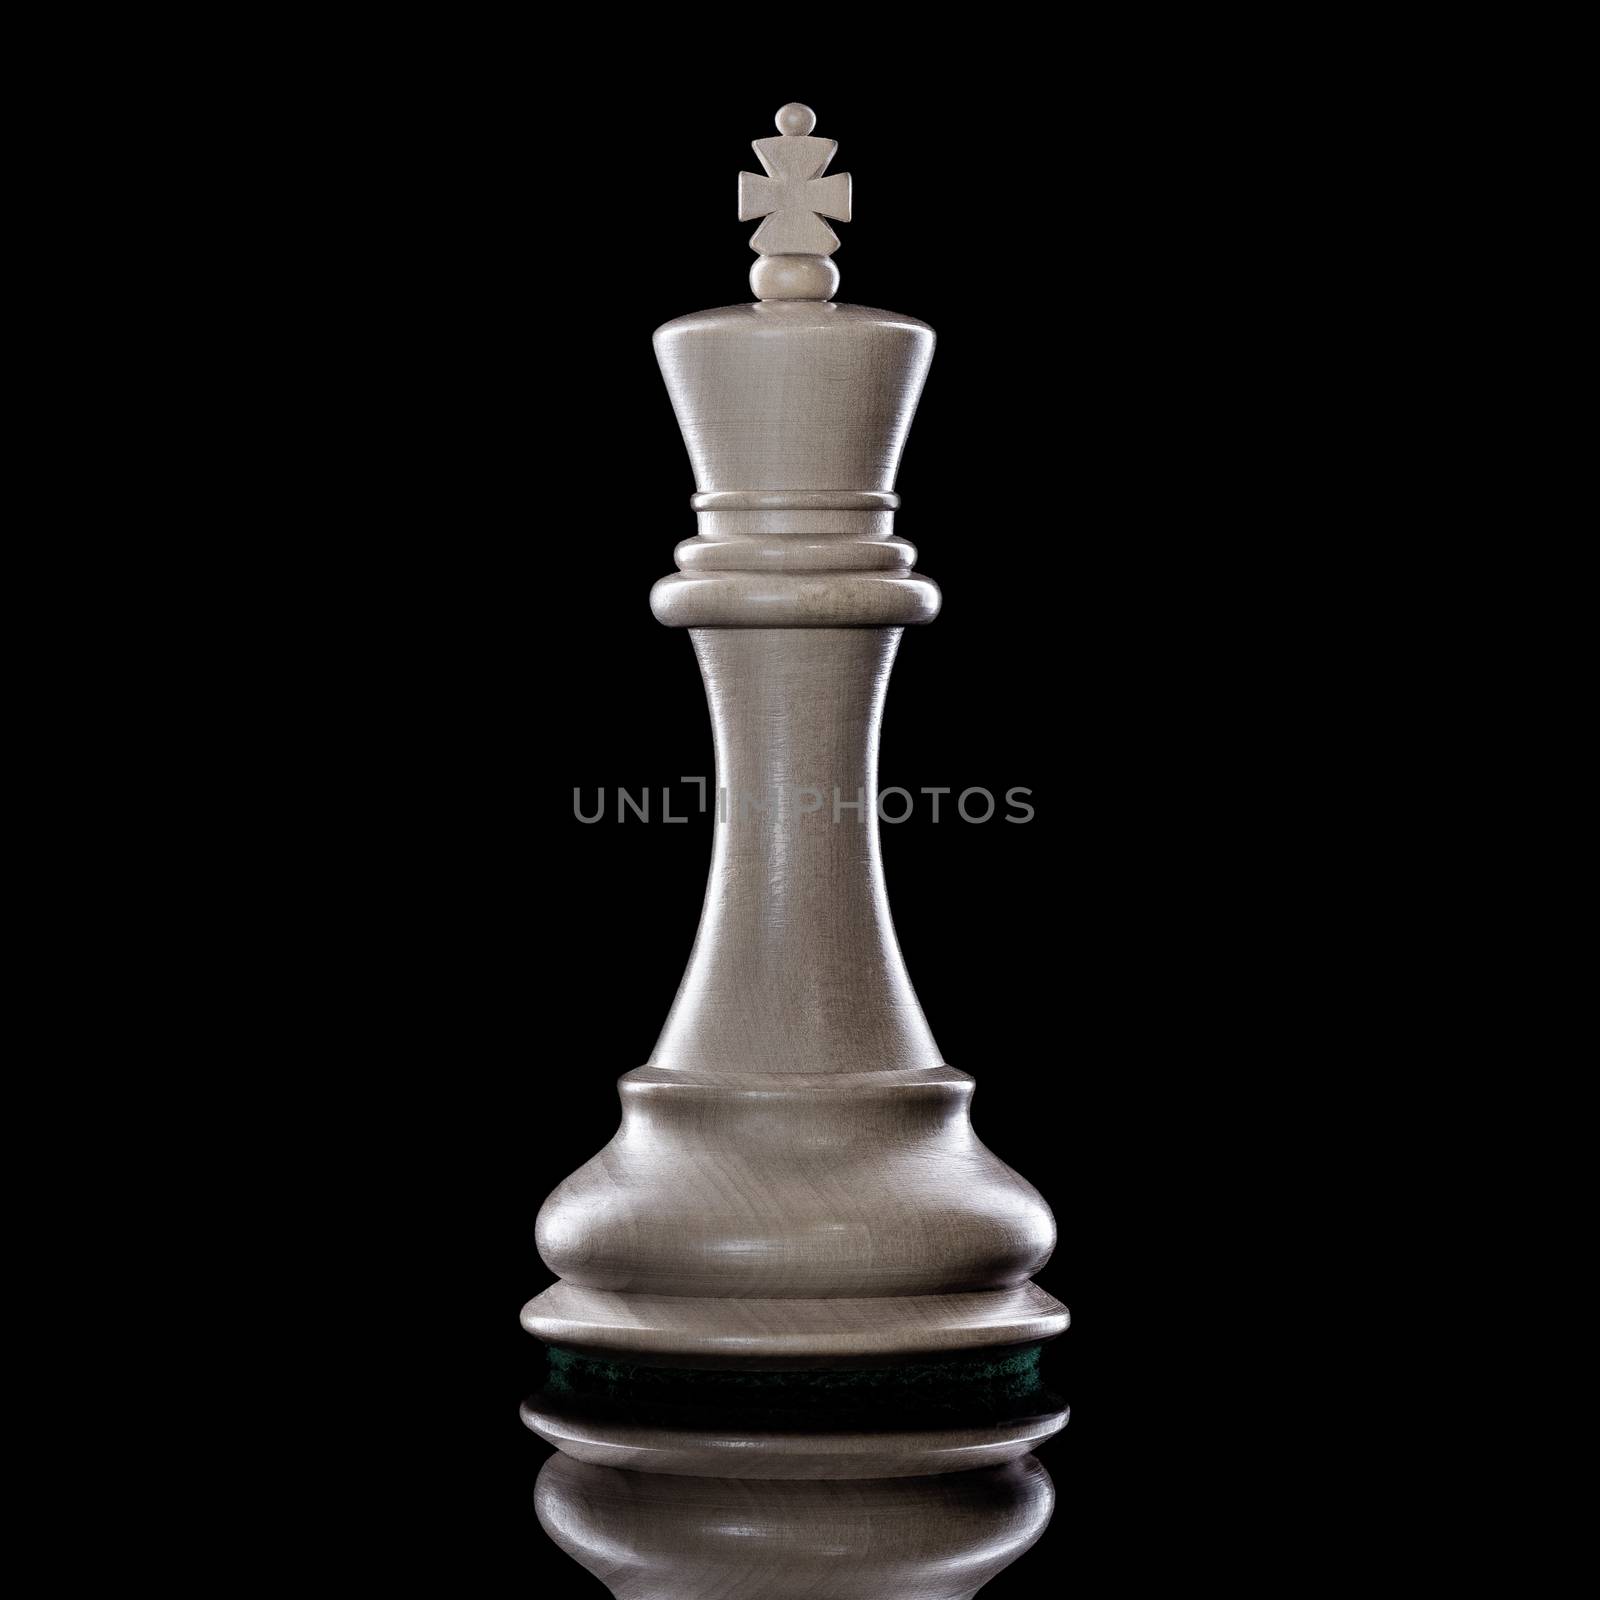 Black and White King of chess setup on dark background. Leader a by kerdkanno